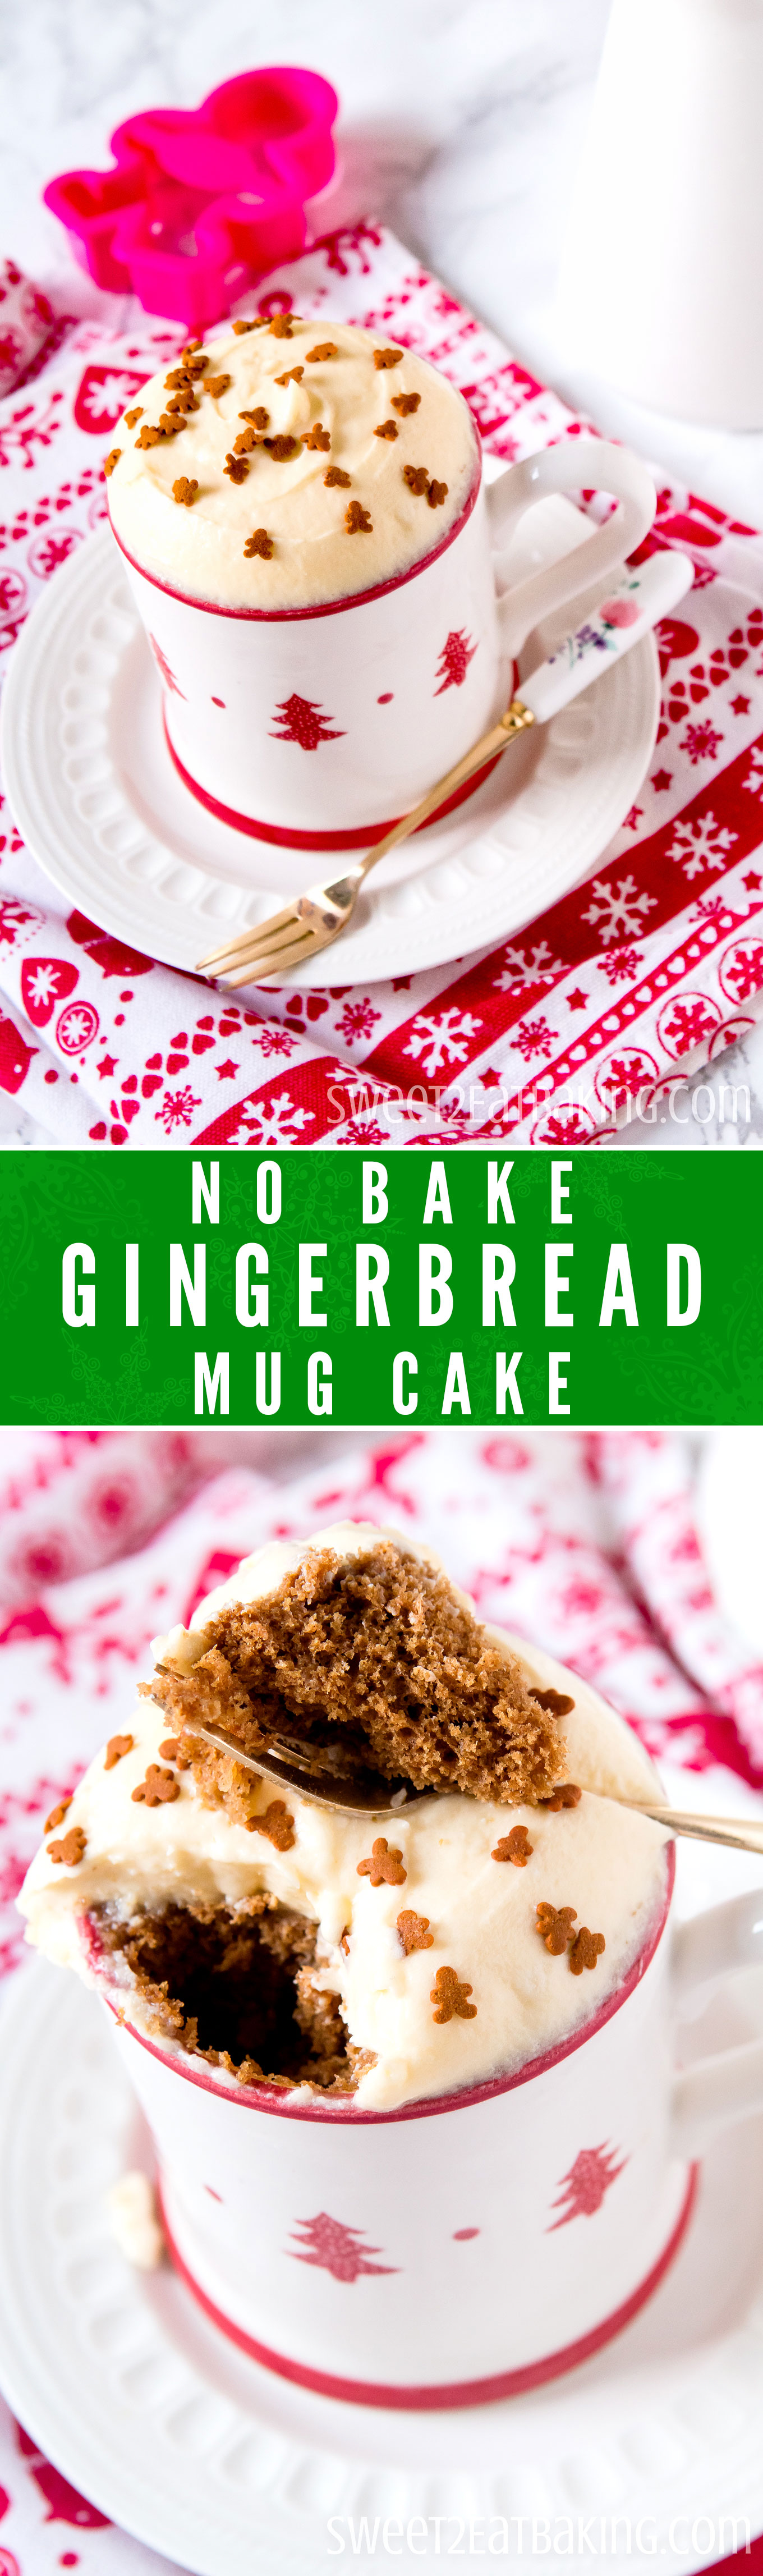 No Bake Gingerbread Mug Cake Recipe by Sweet2EatBaking.com | This Gingerbread Mug Cake is the perfect, quick Christmas dessert when you’re craving those festive flavours this holiday season. Quick and simple to make, and perfectly flavoured with traditional festive gingerbread spices